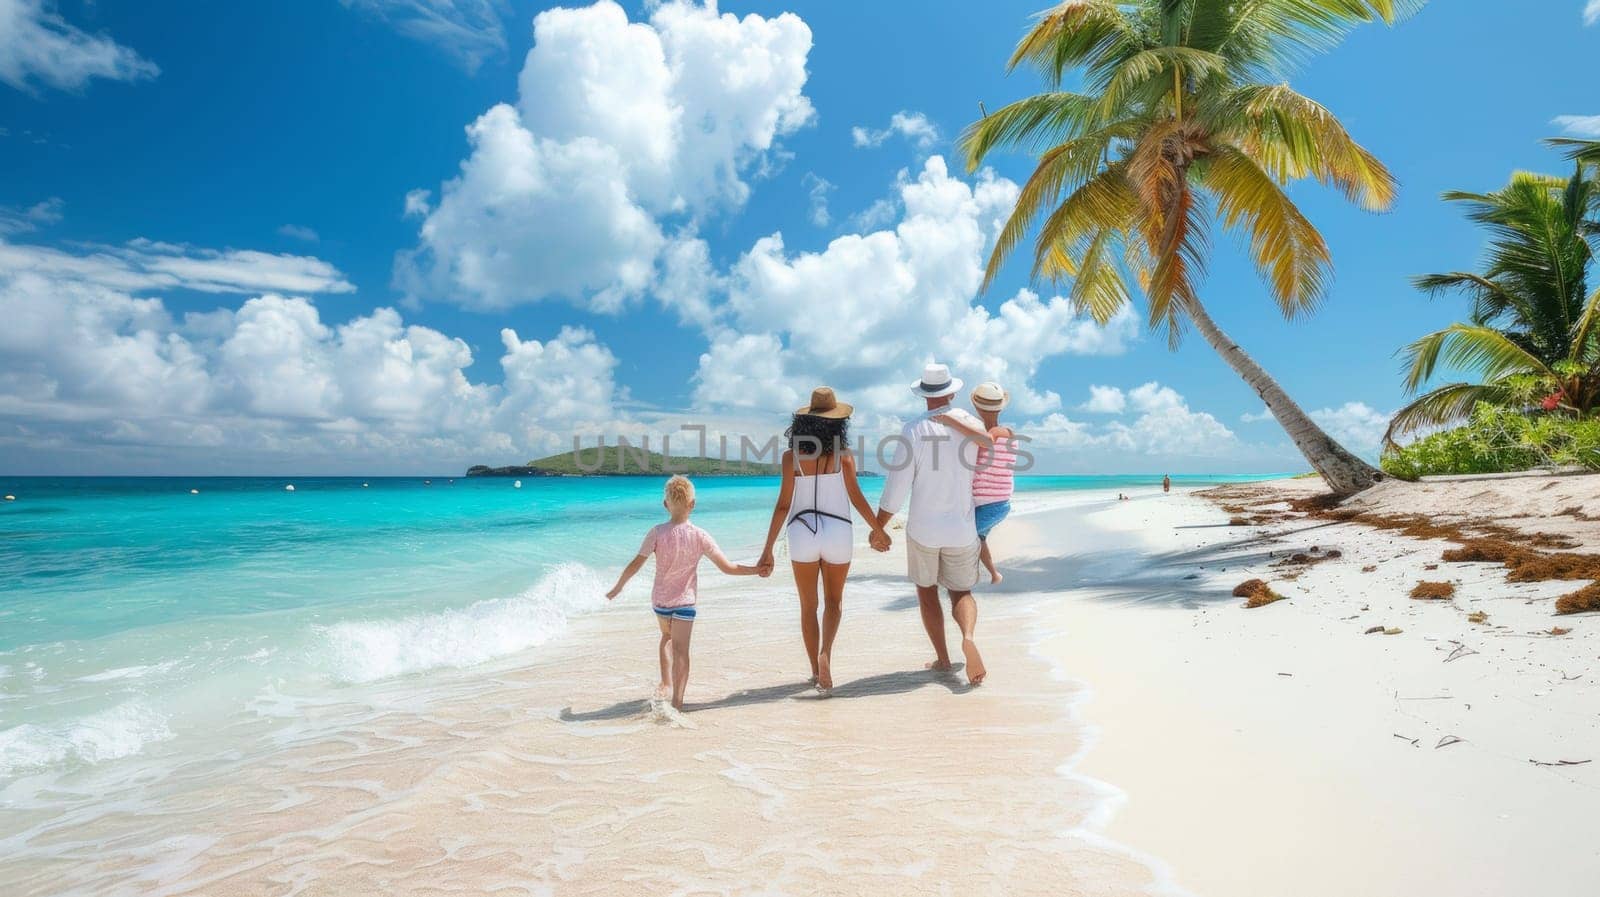 A family walking on a beach with palm trees in the background, AI by starush